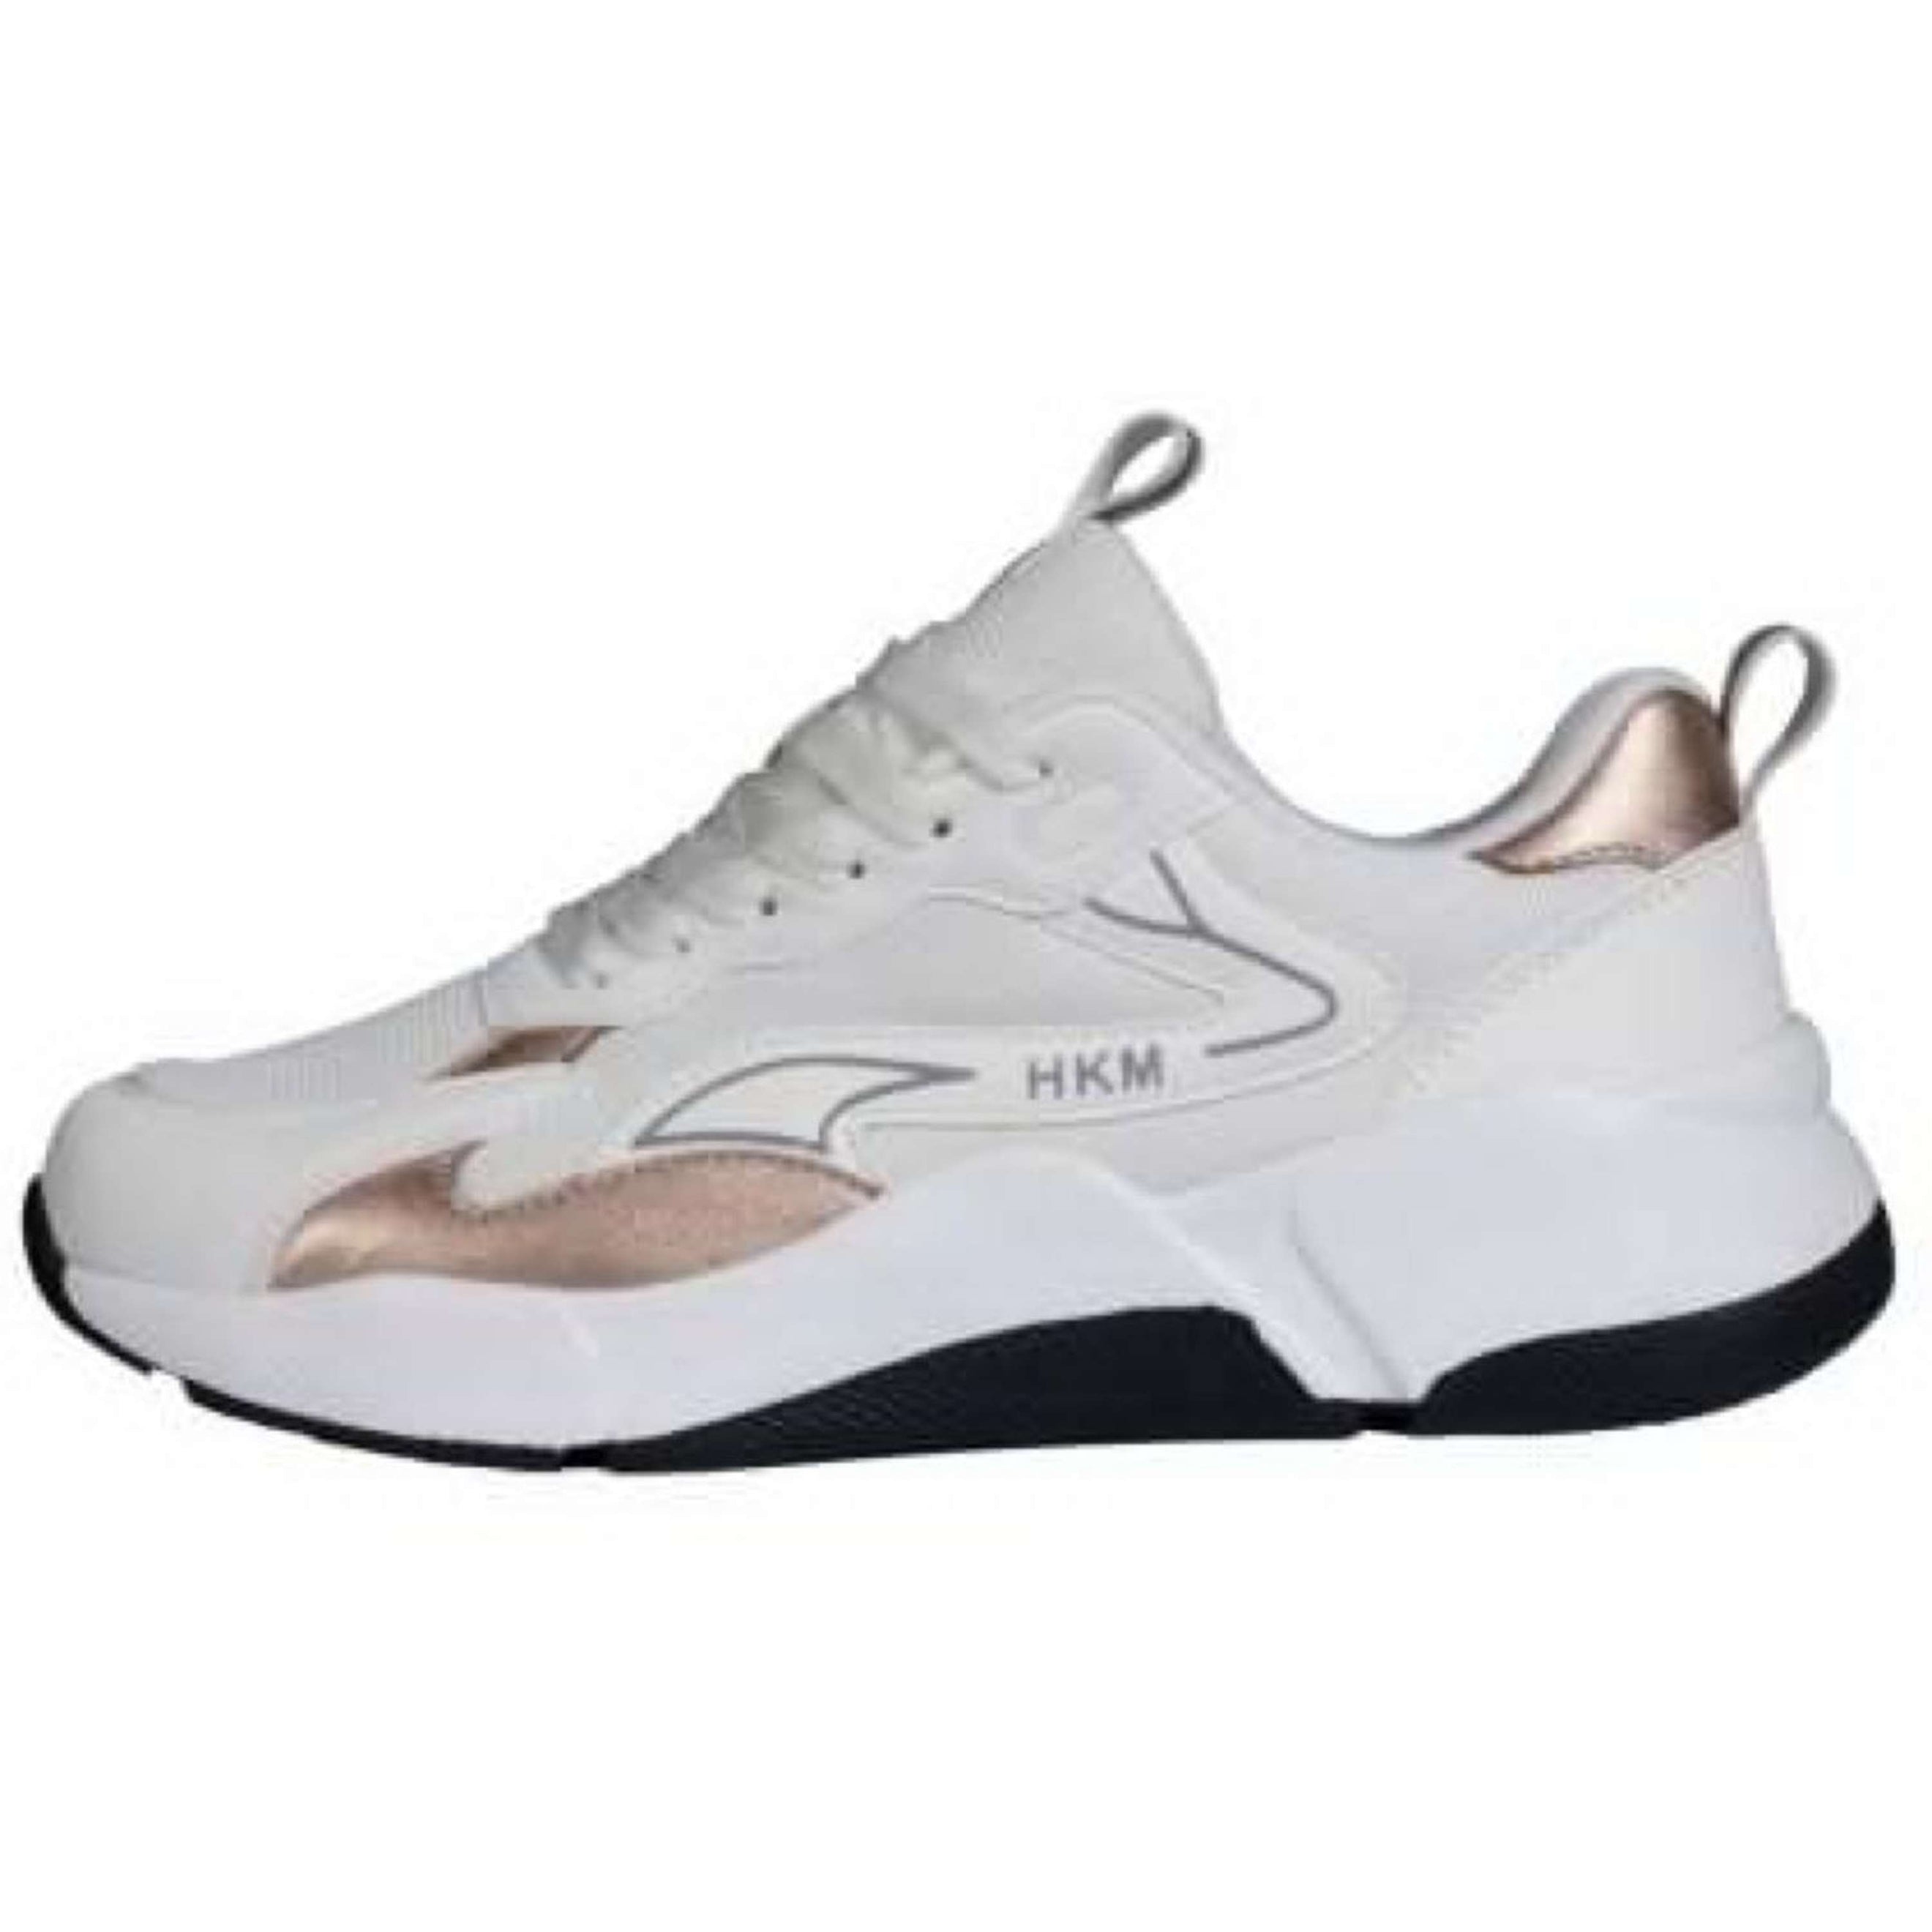 HKM Chaussures Rosegold Glamour Blanc